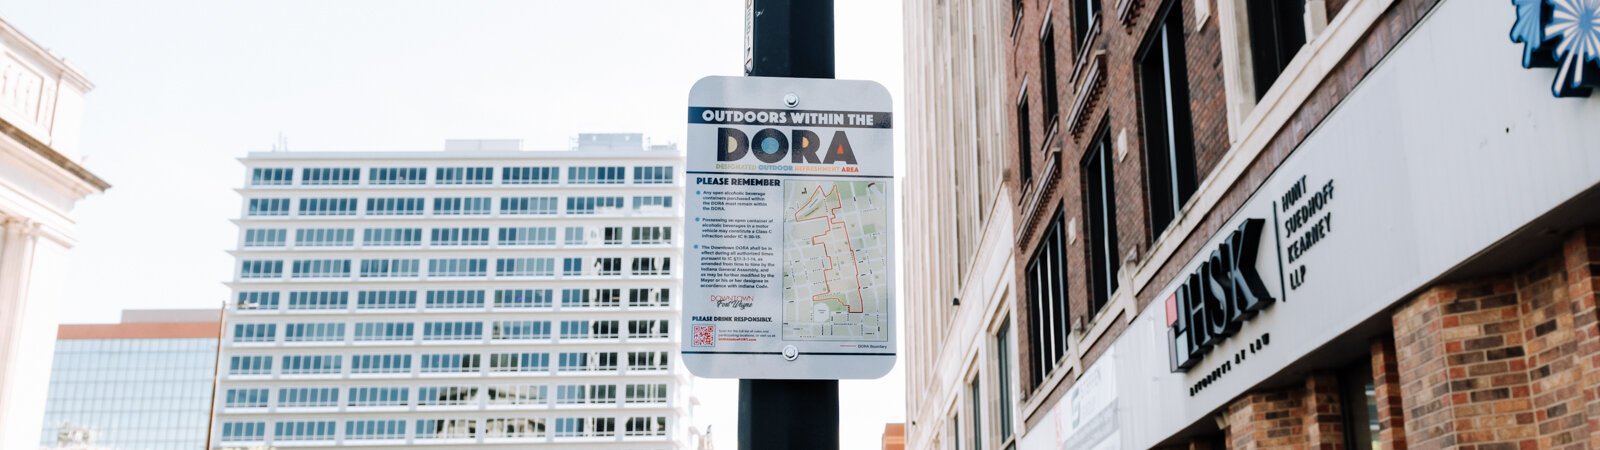 A sign at Berry Street and Calhoun Street reminds people of the rules within the new Downtown DORA (Designated Outdoor Refreshment Area).